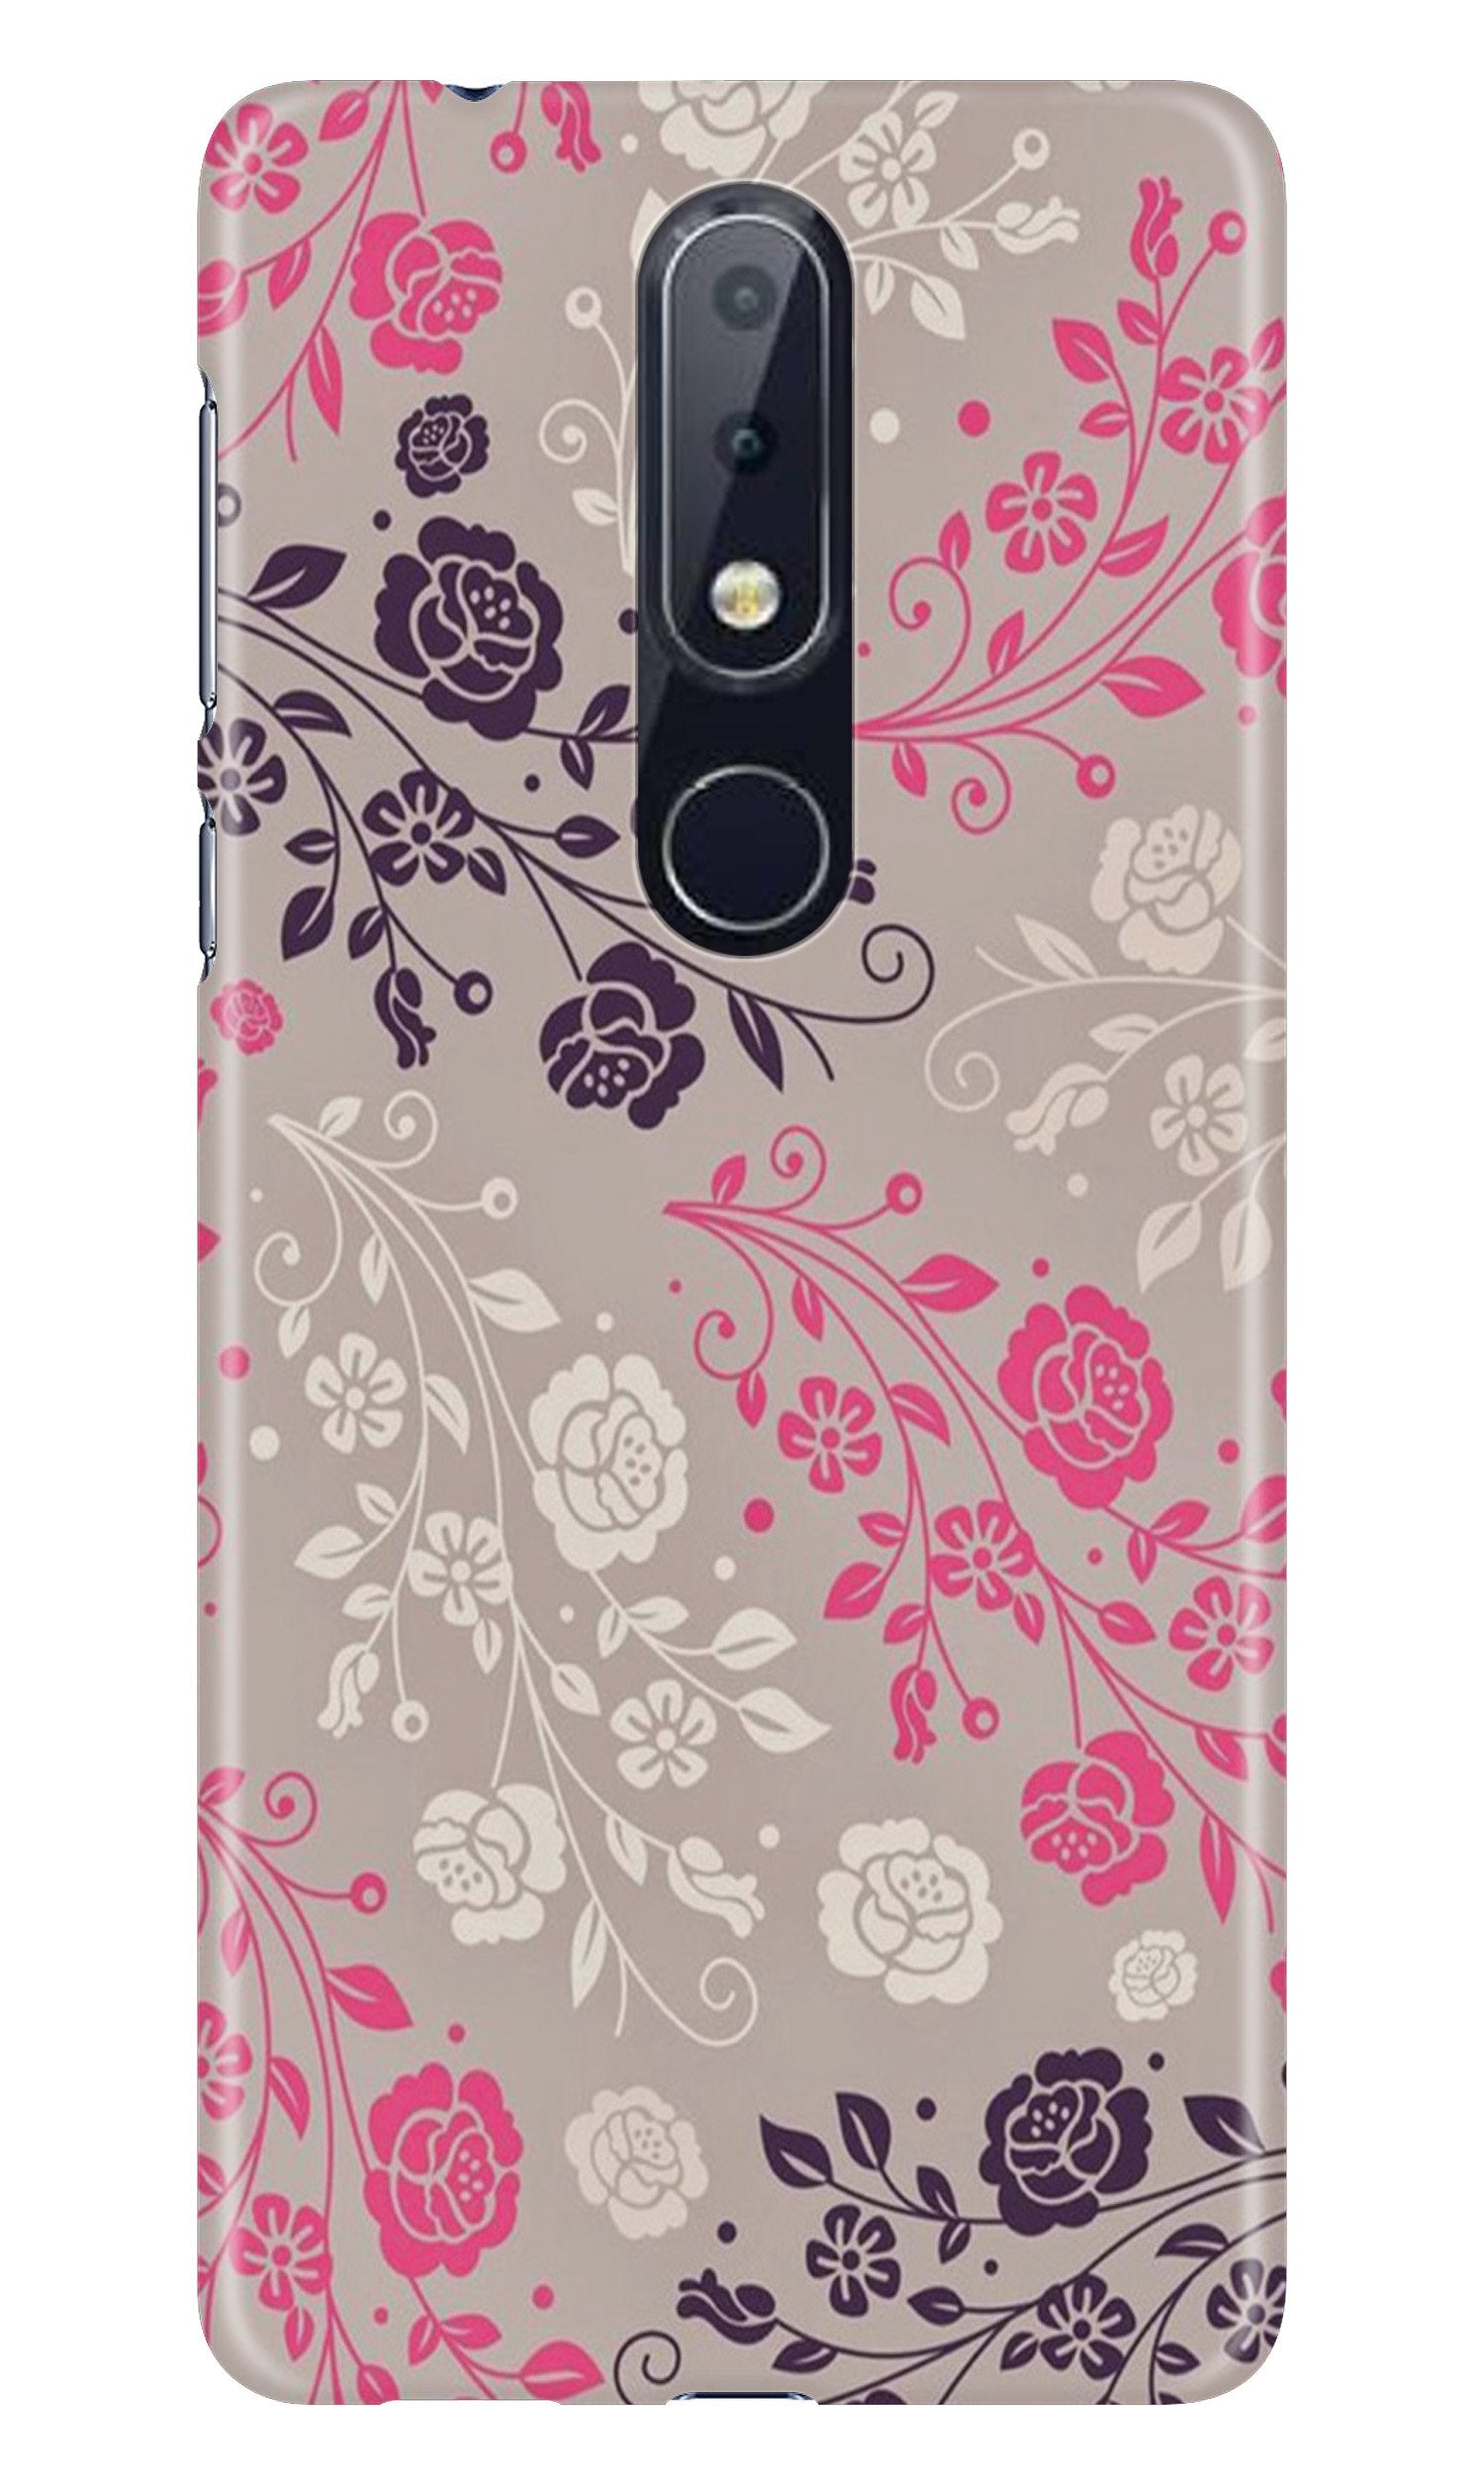 Pattern2 Case for Nokia 3.2